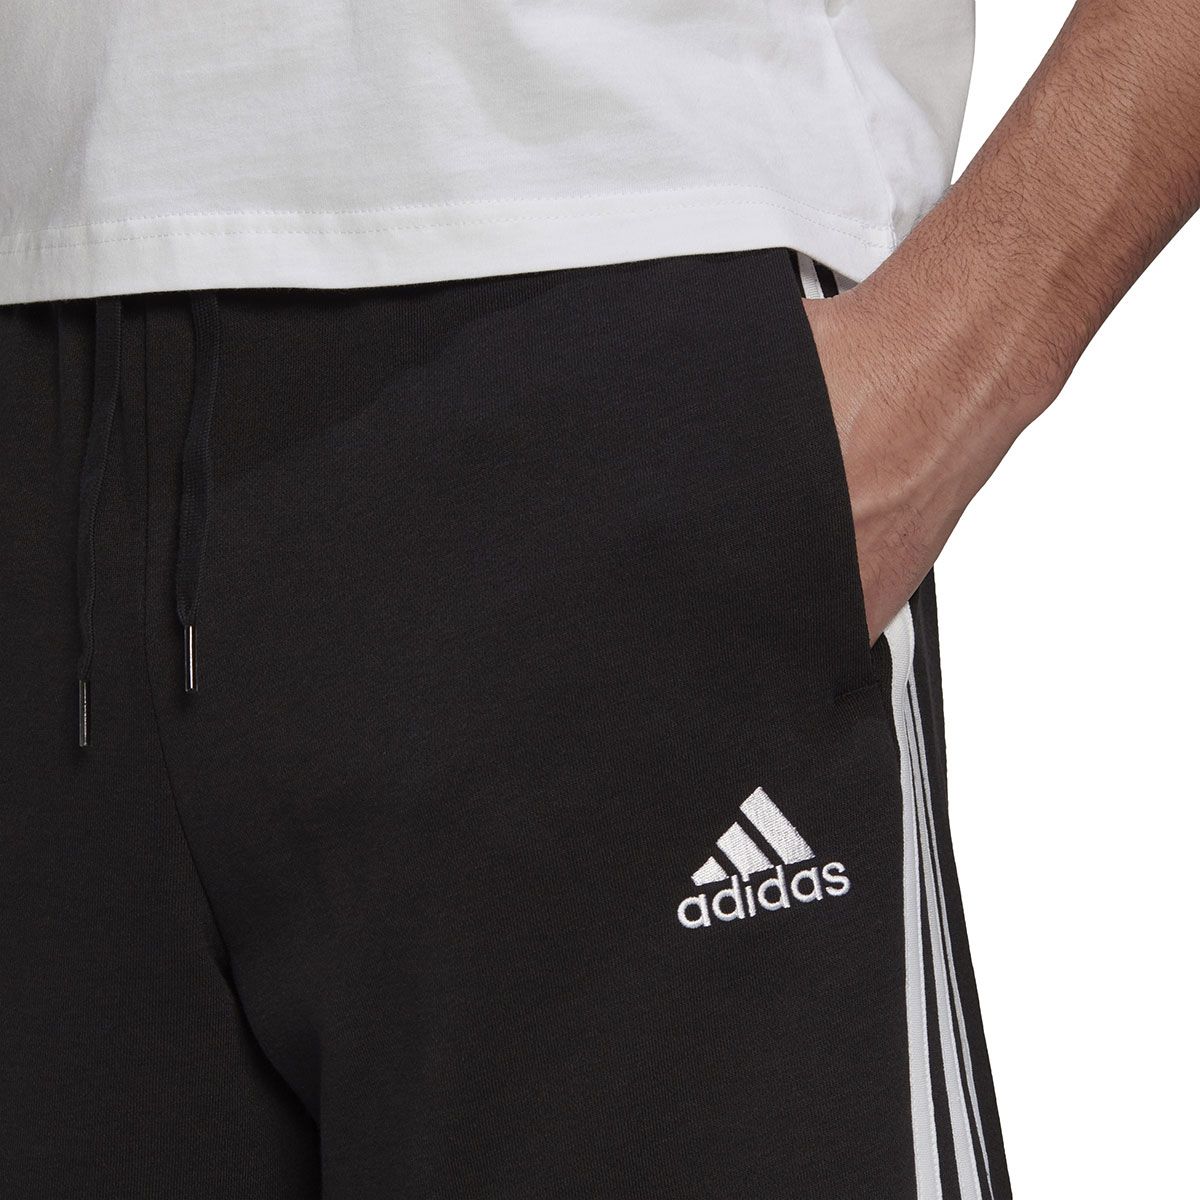 adidas Essentials French Terry 3-Stripes Men's Shorts GK9597